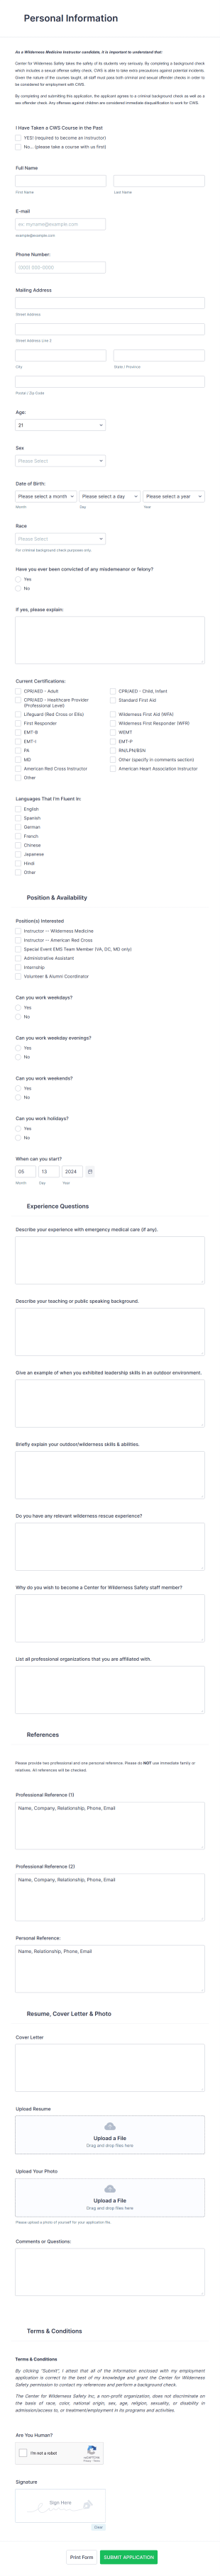 Medical Staff Application Form Template